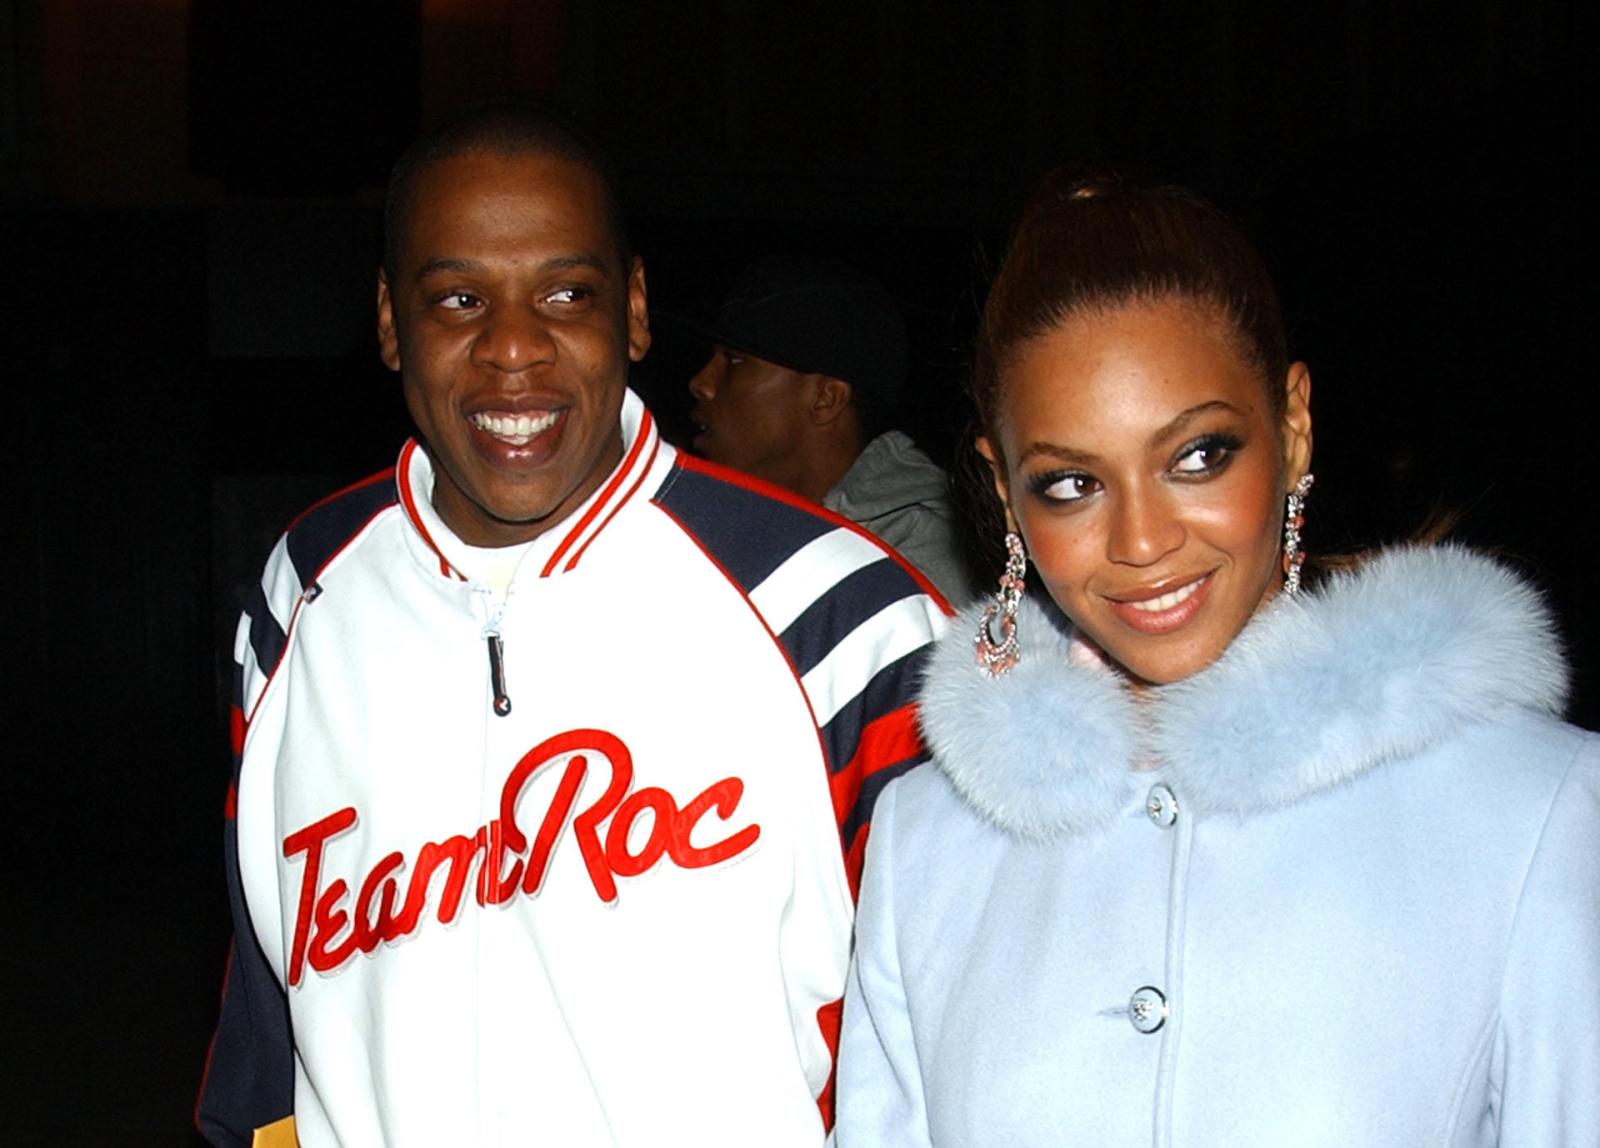 Can True Love Survive Infidelity? The Story of Beyoncé and Jay-Z - image 2